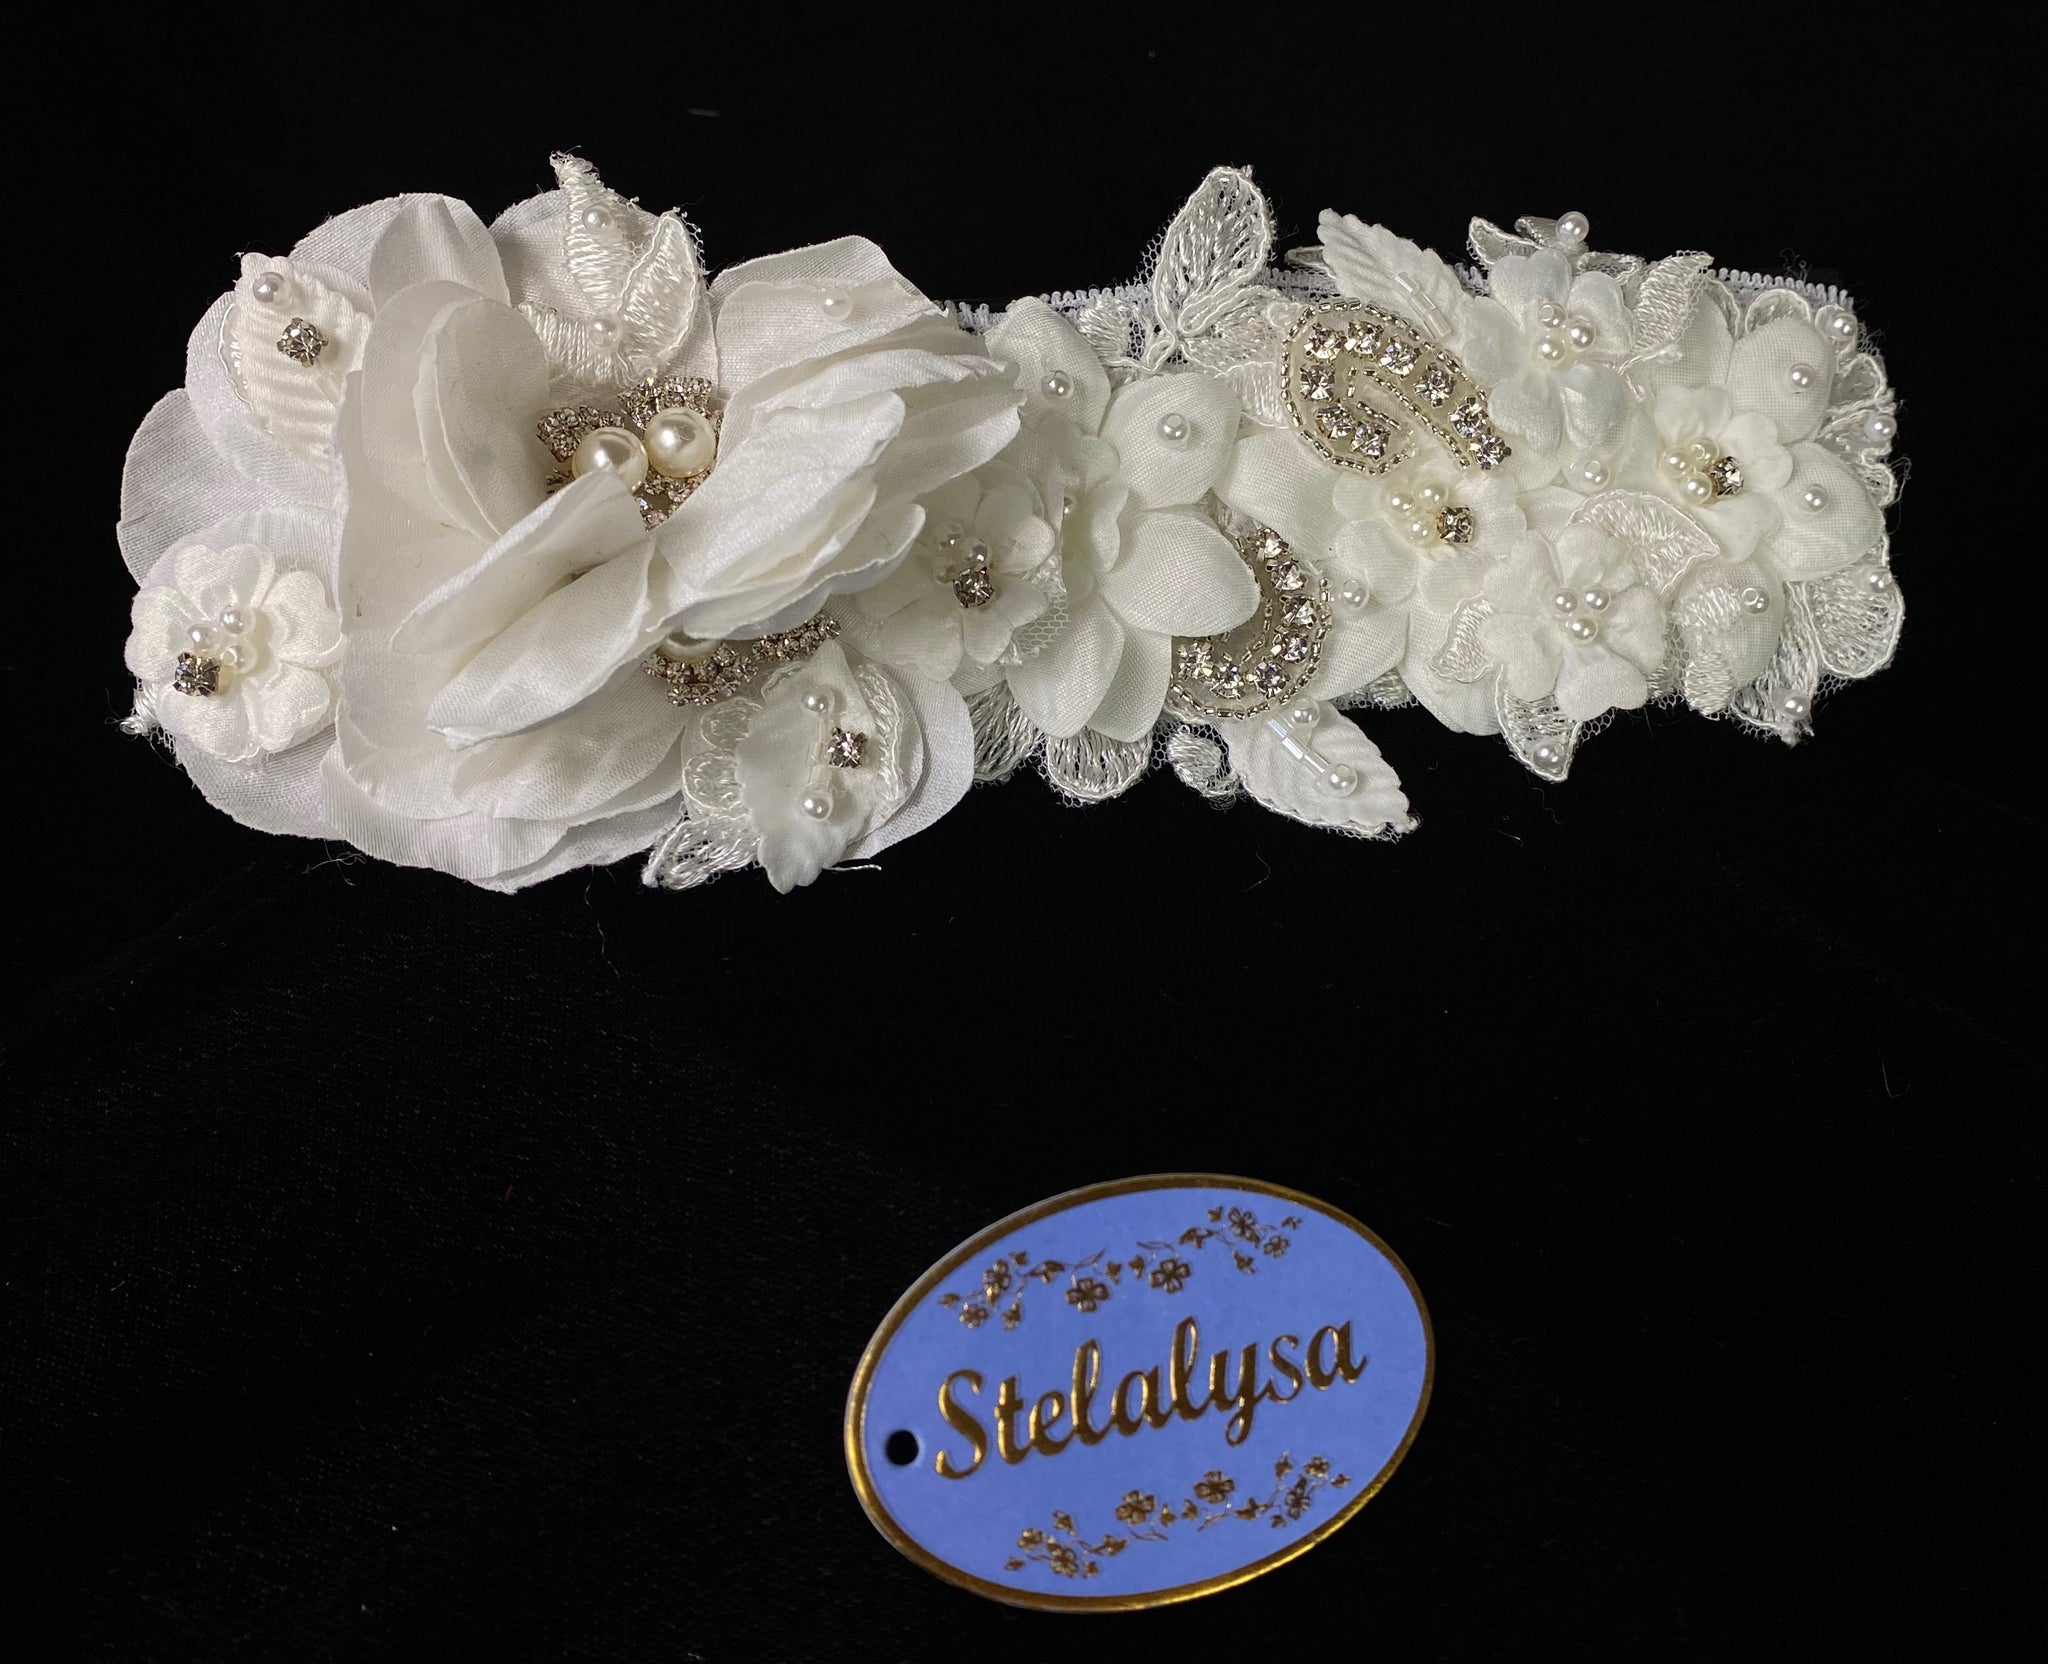 Baptism Headwrap  This is an elegant handmade and one-of-a-kind white lace headwrap with flowers of different materials, pearls and rhinestones.  Headwrap is made of soft cotton lace elastic.  Your baby will look like the little princess she is with this headwrap on her special day!  